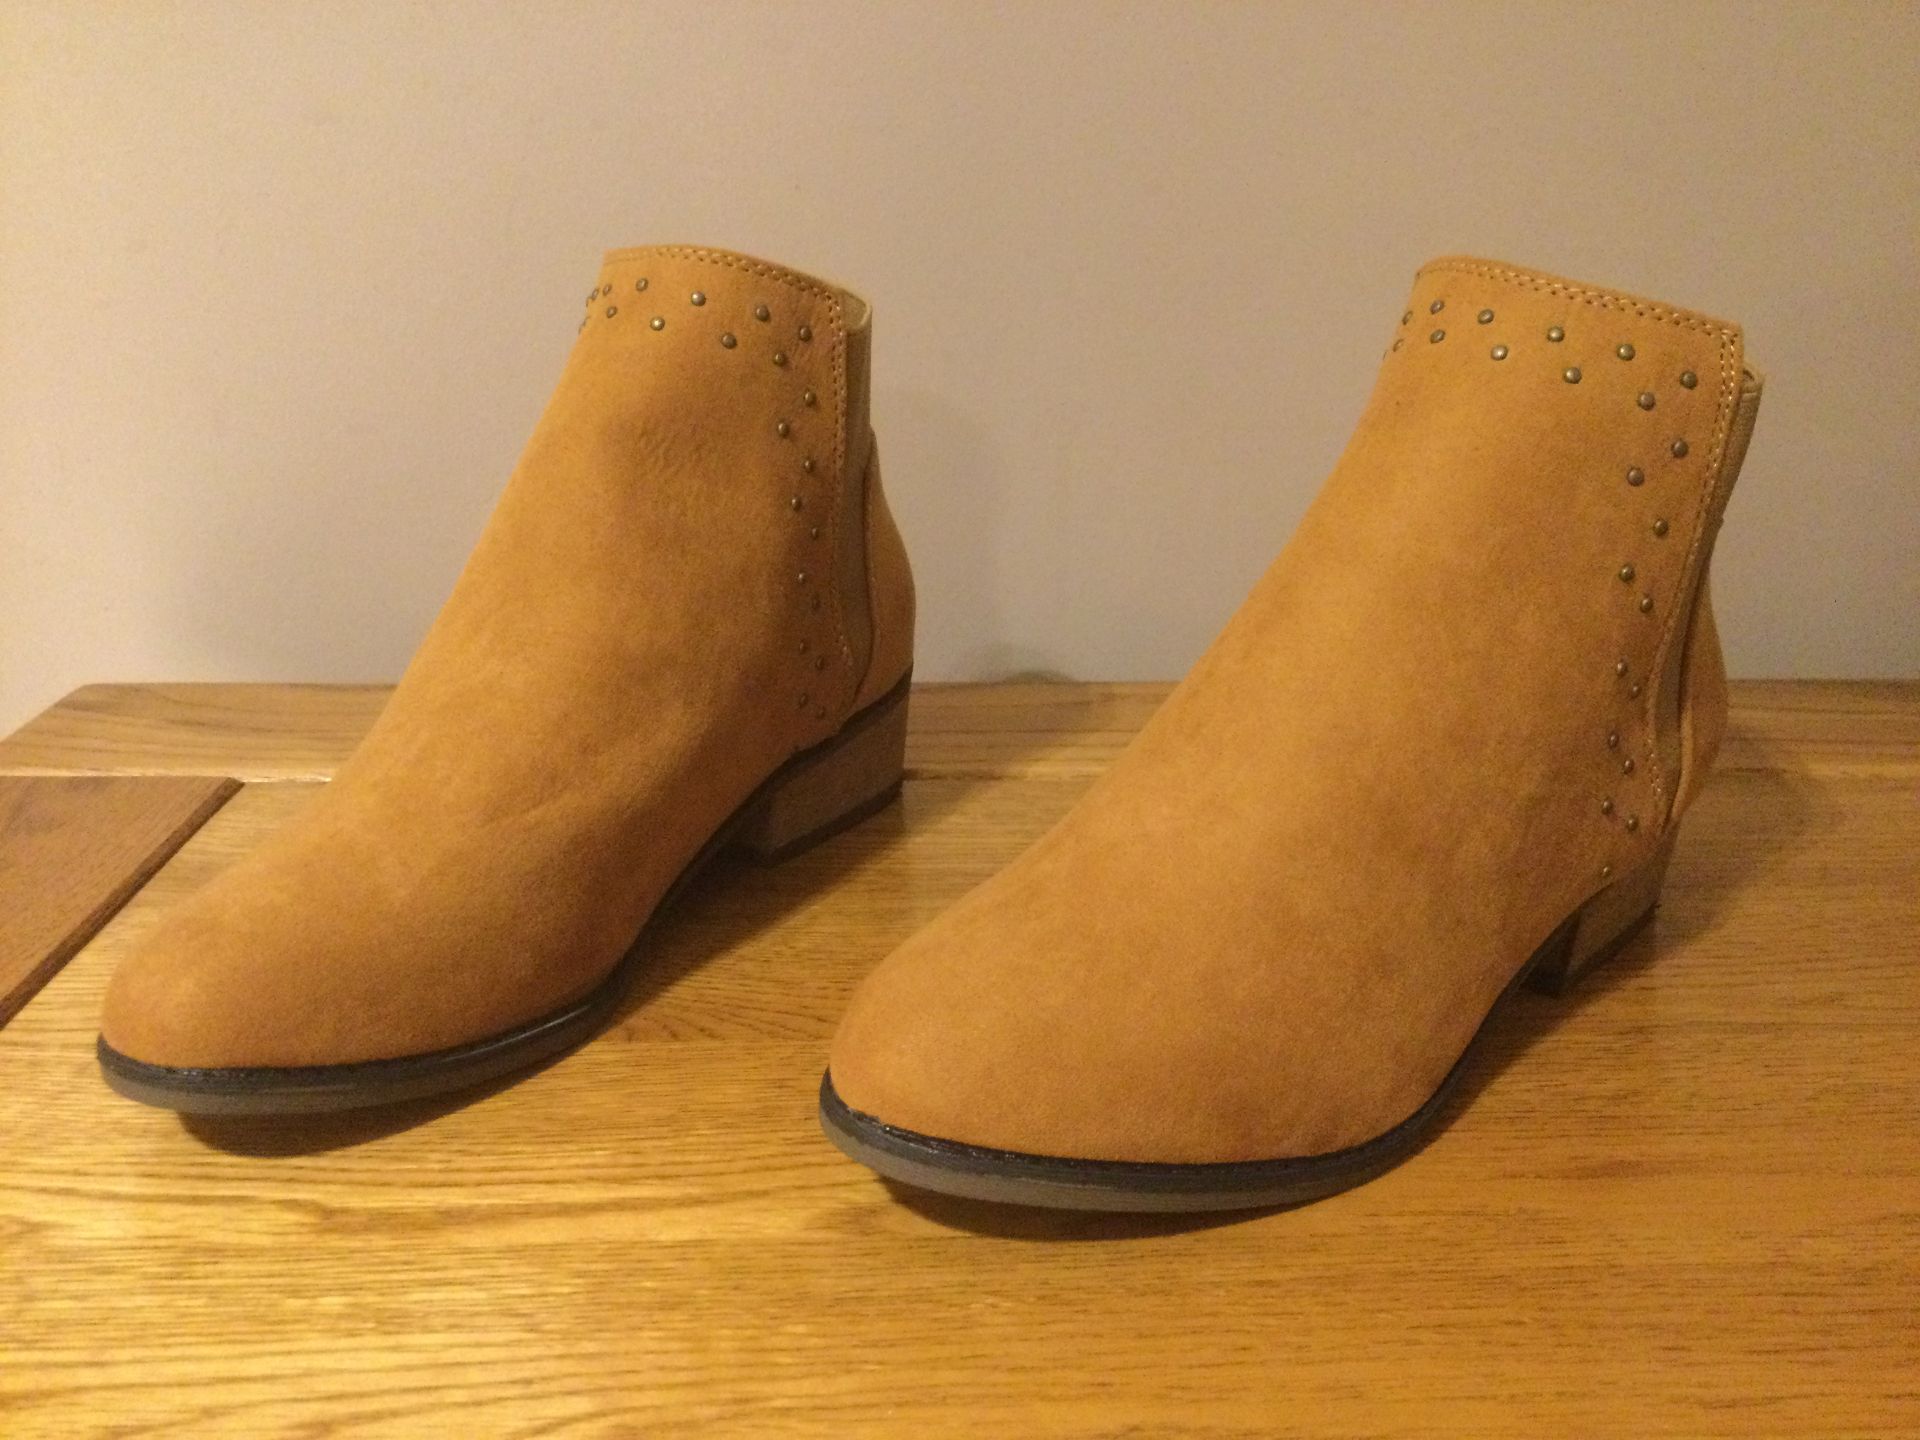 Dolcis “Wendy” Low Heel Ankle Boots, Size 3, Tan - New RRP £45.99 - Image 2 of 7